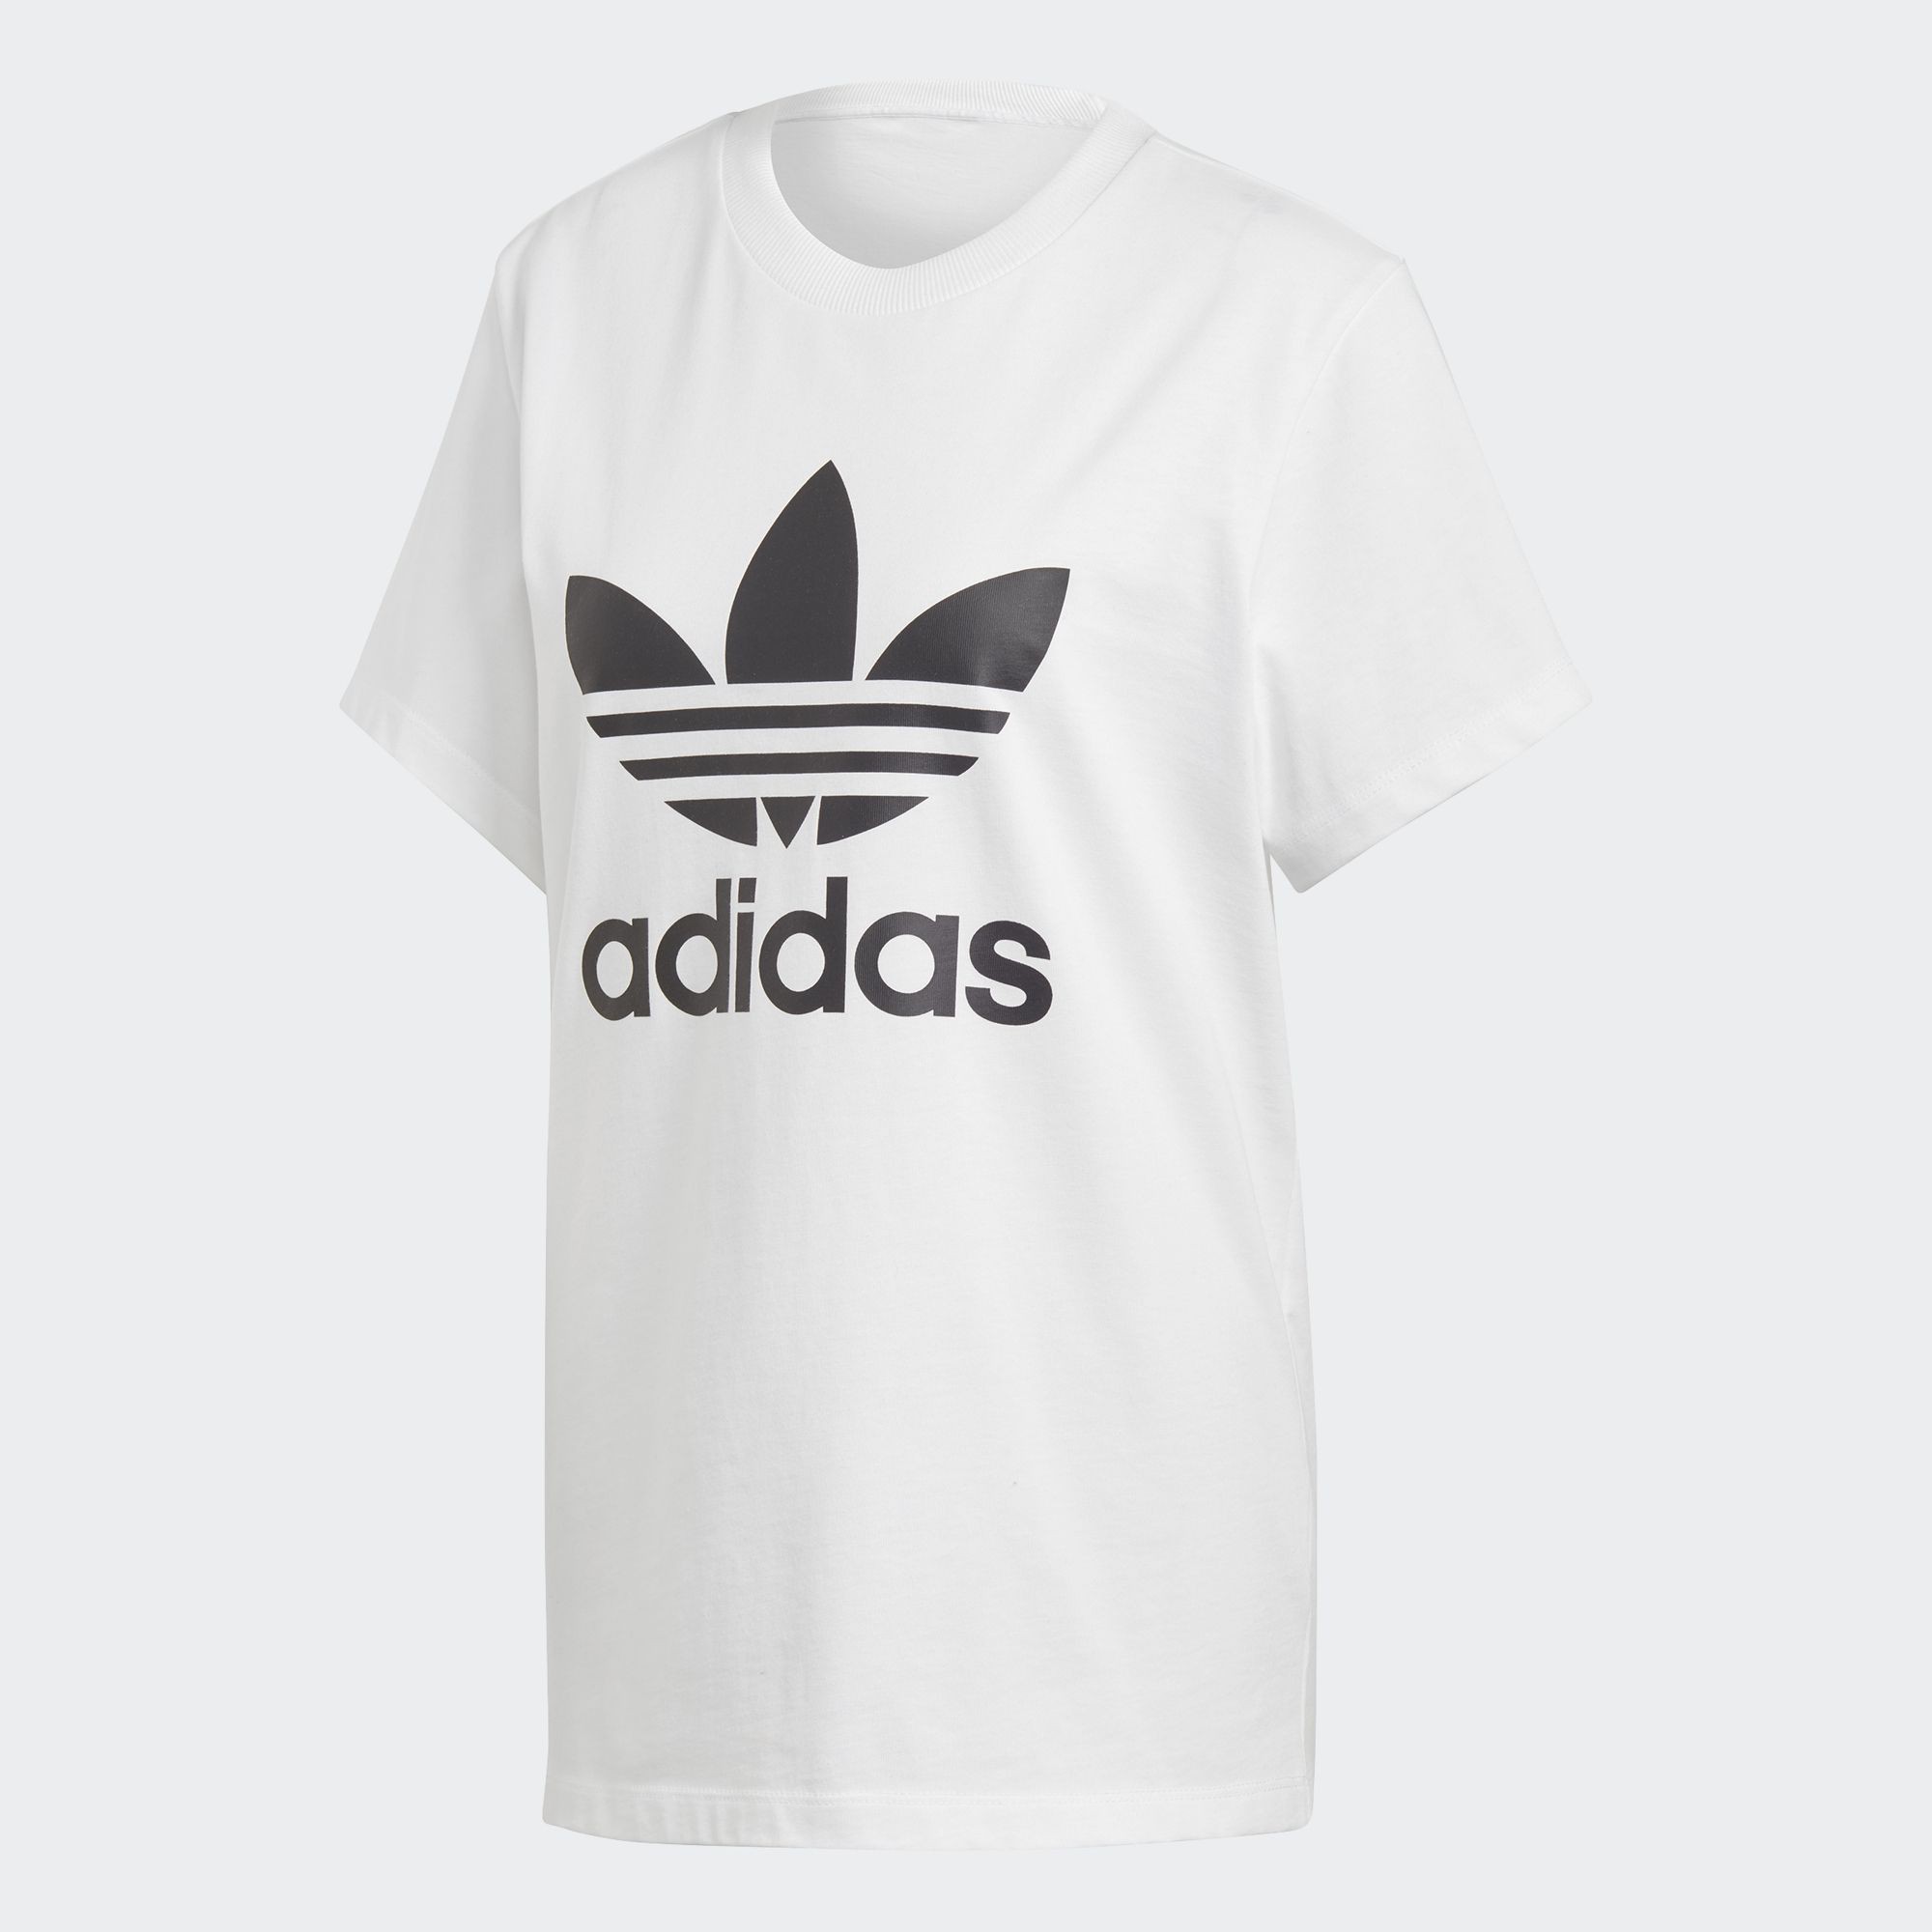 adidas shirt - Tops Price and Deals 